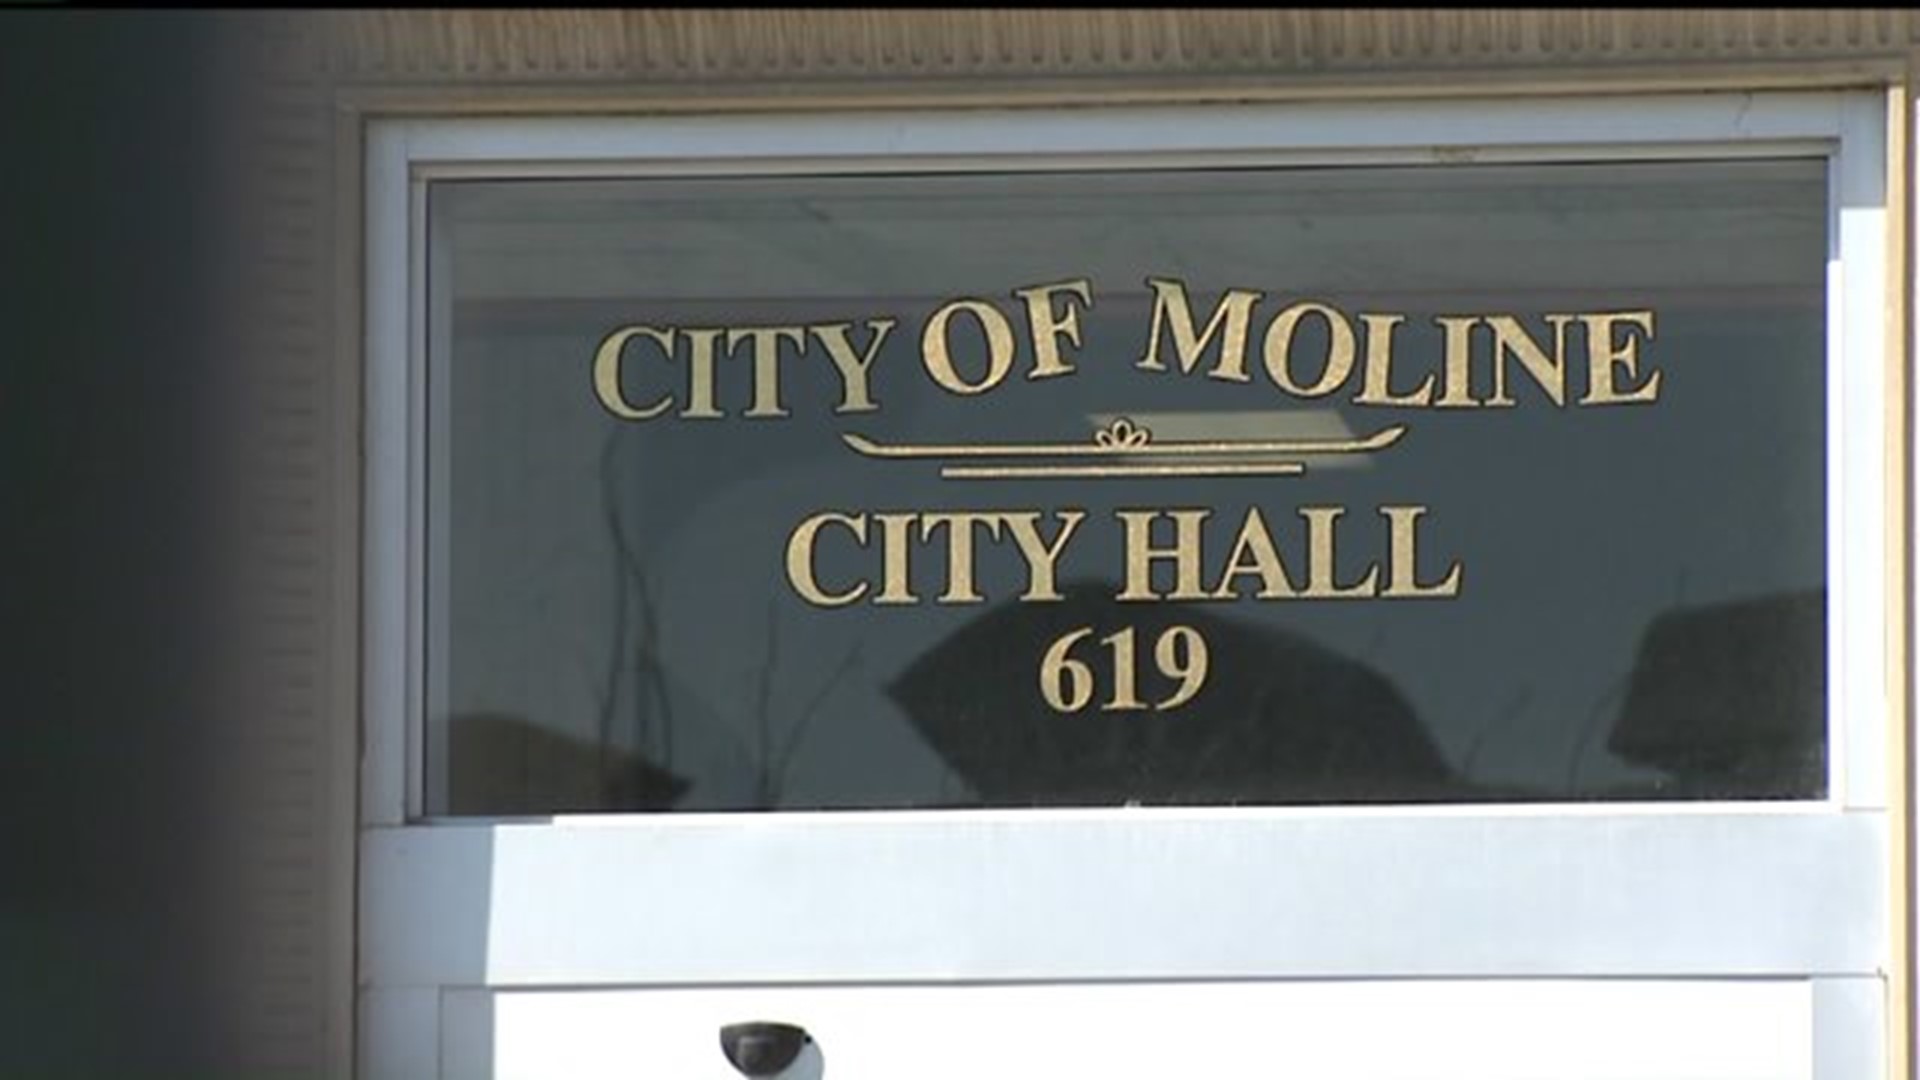 Budget cuts could impact City of Moline